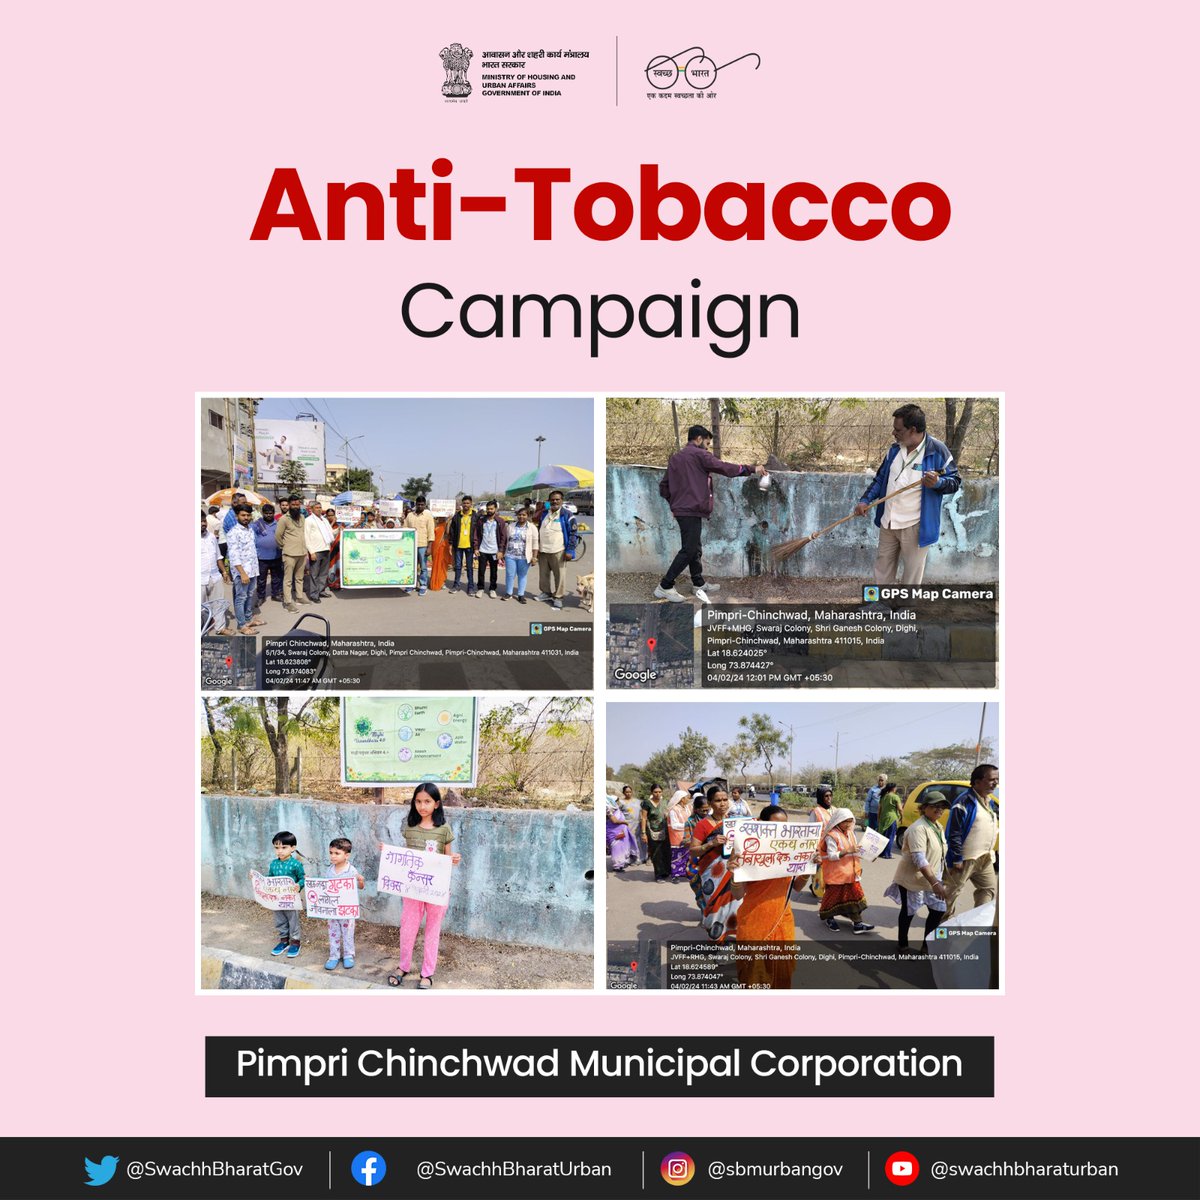 On #WorldCancerDay, Pimpri Chinchwad's creative anti-tobacco campaign converts red stains into brilliant rangoli, encouraging a tobacco-free lifestyle and cleanliness.